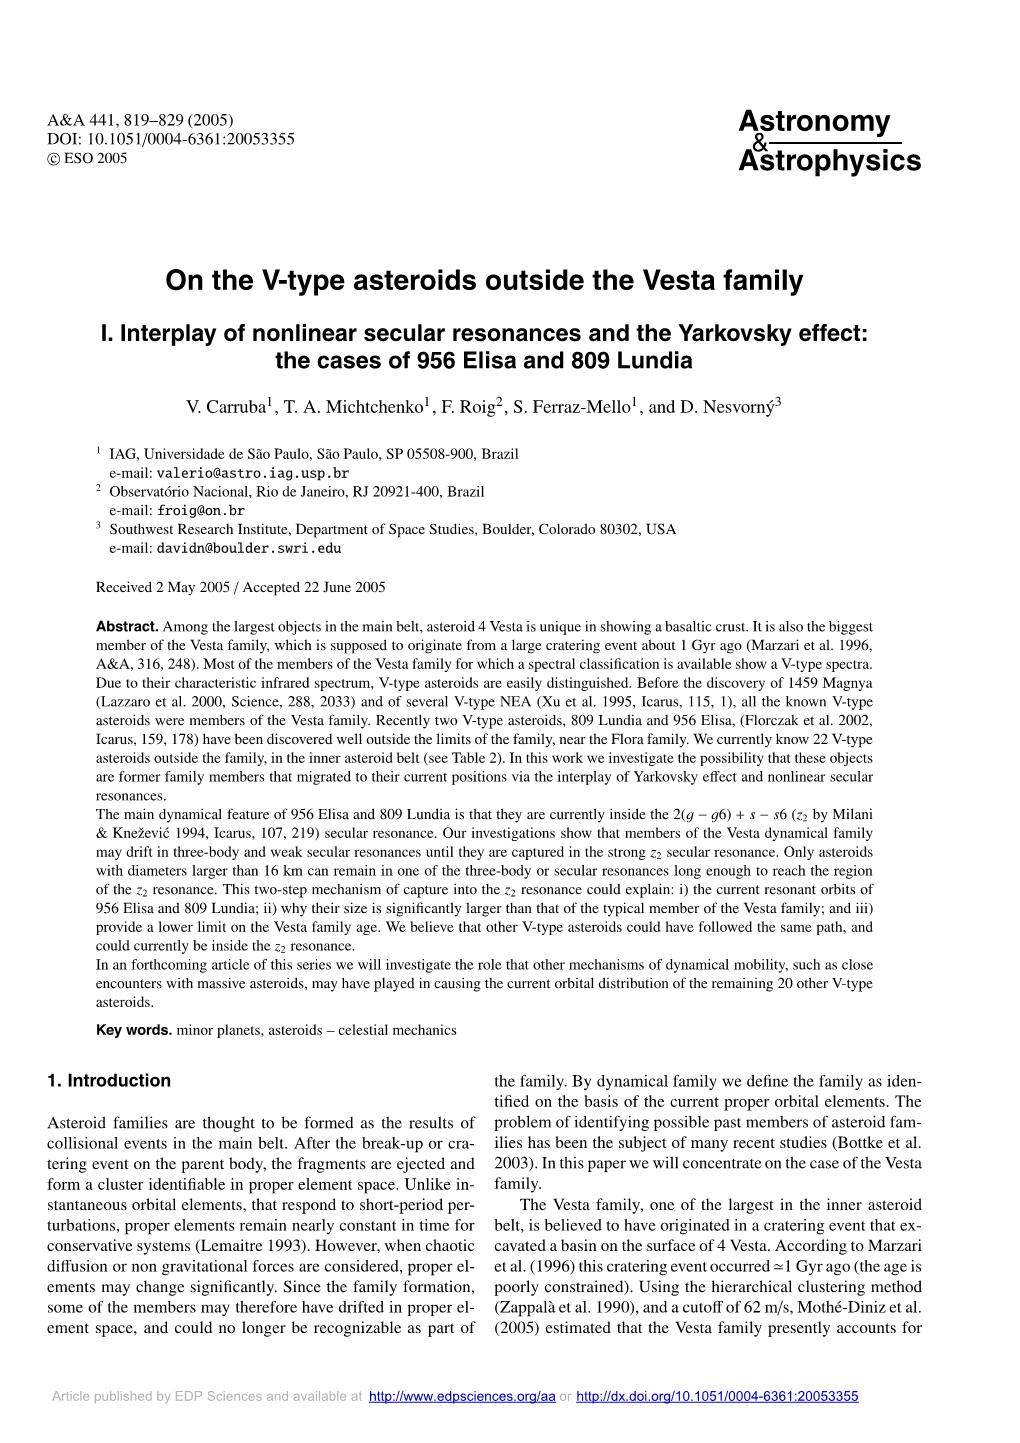 I. Interplay of Nonlinear Secular Resonances and the Yarkovsky Effect: the Cases of 956 Elisa and 809 Lundia